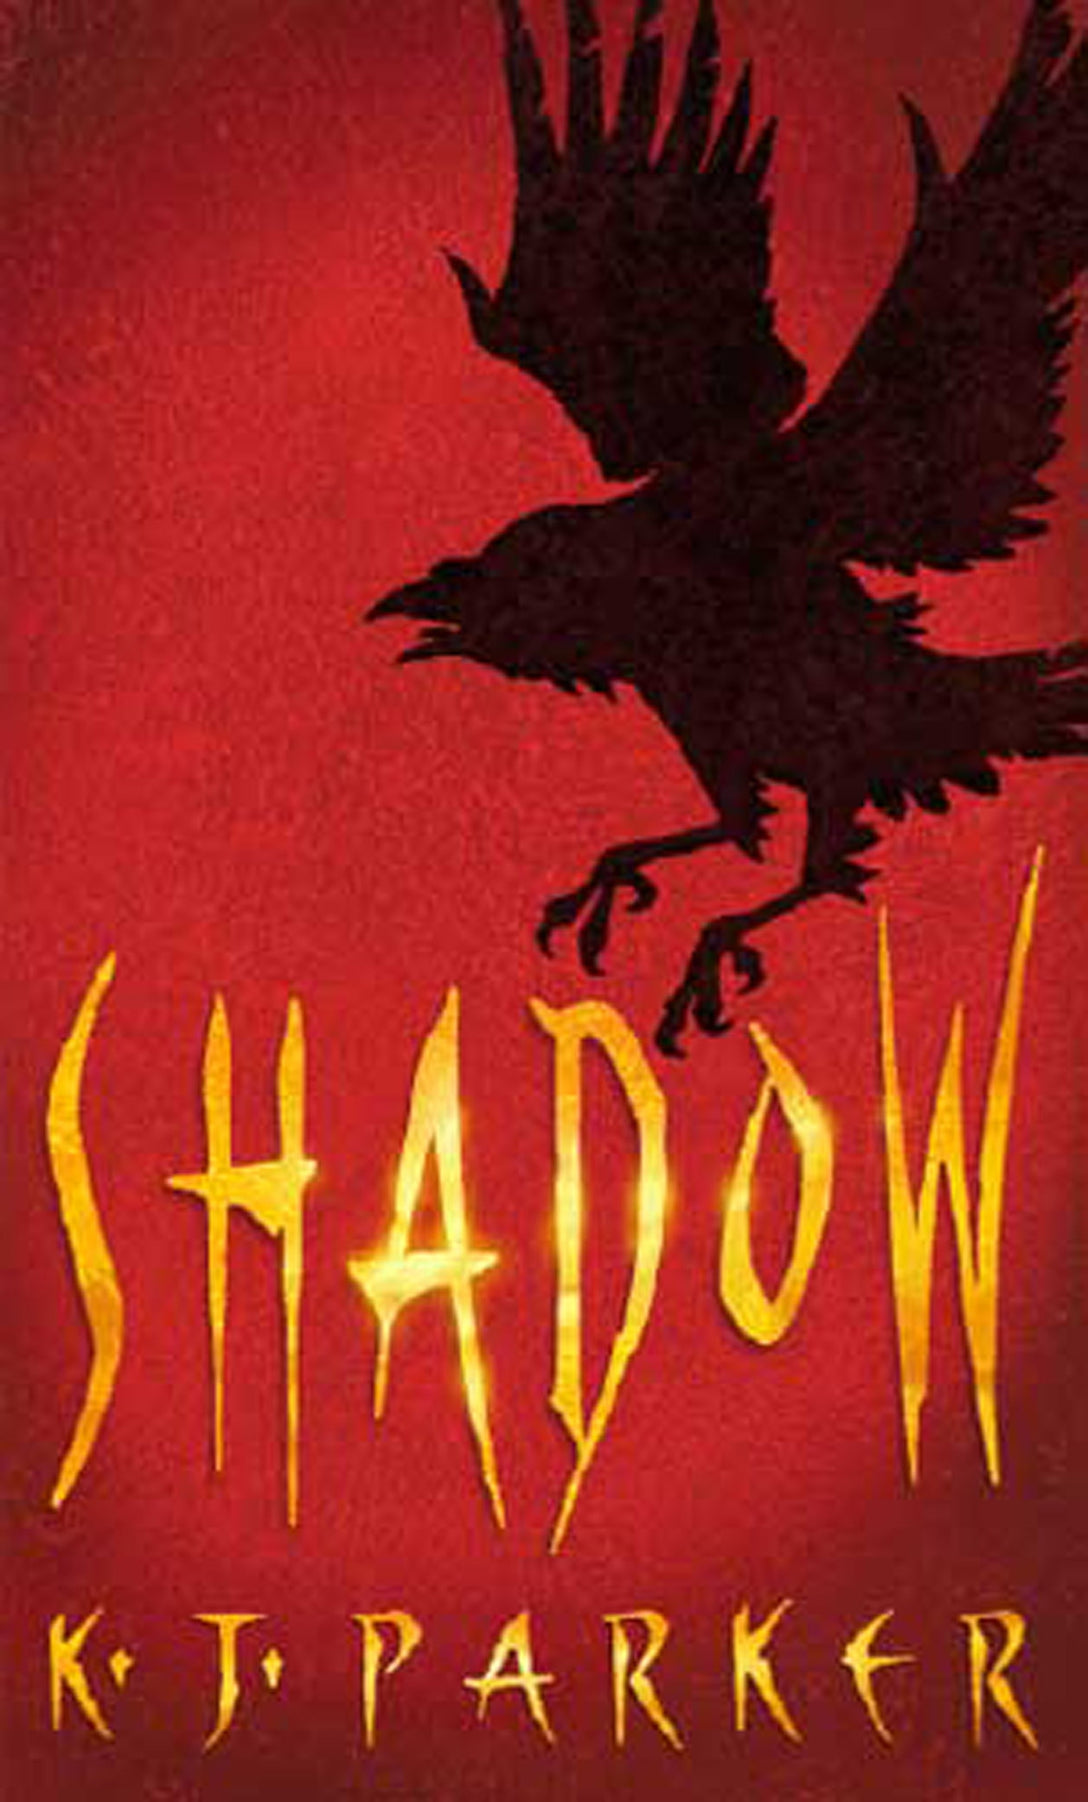 Shadow by K. J. Parker